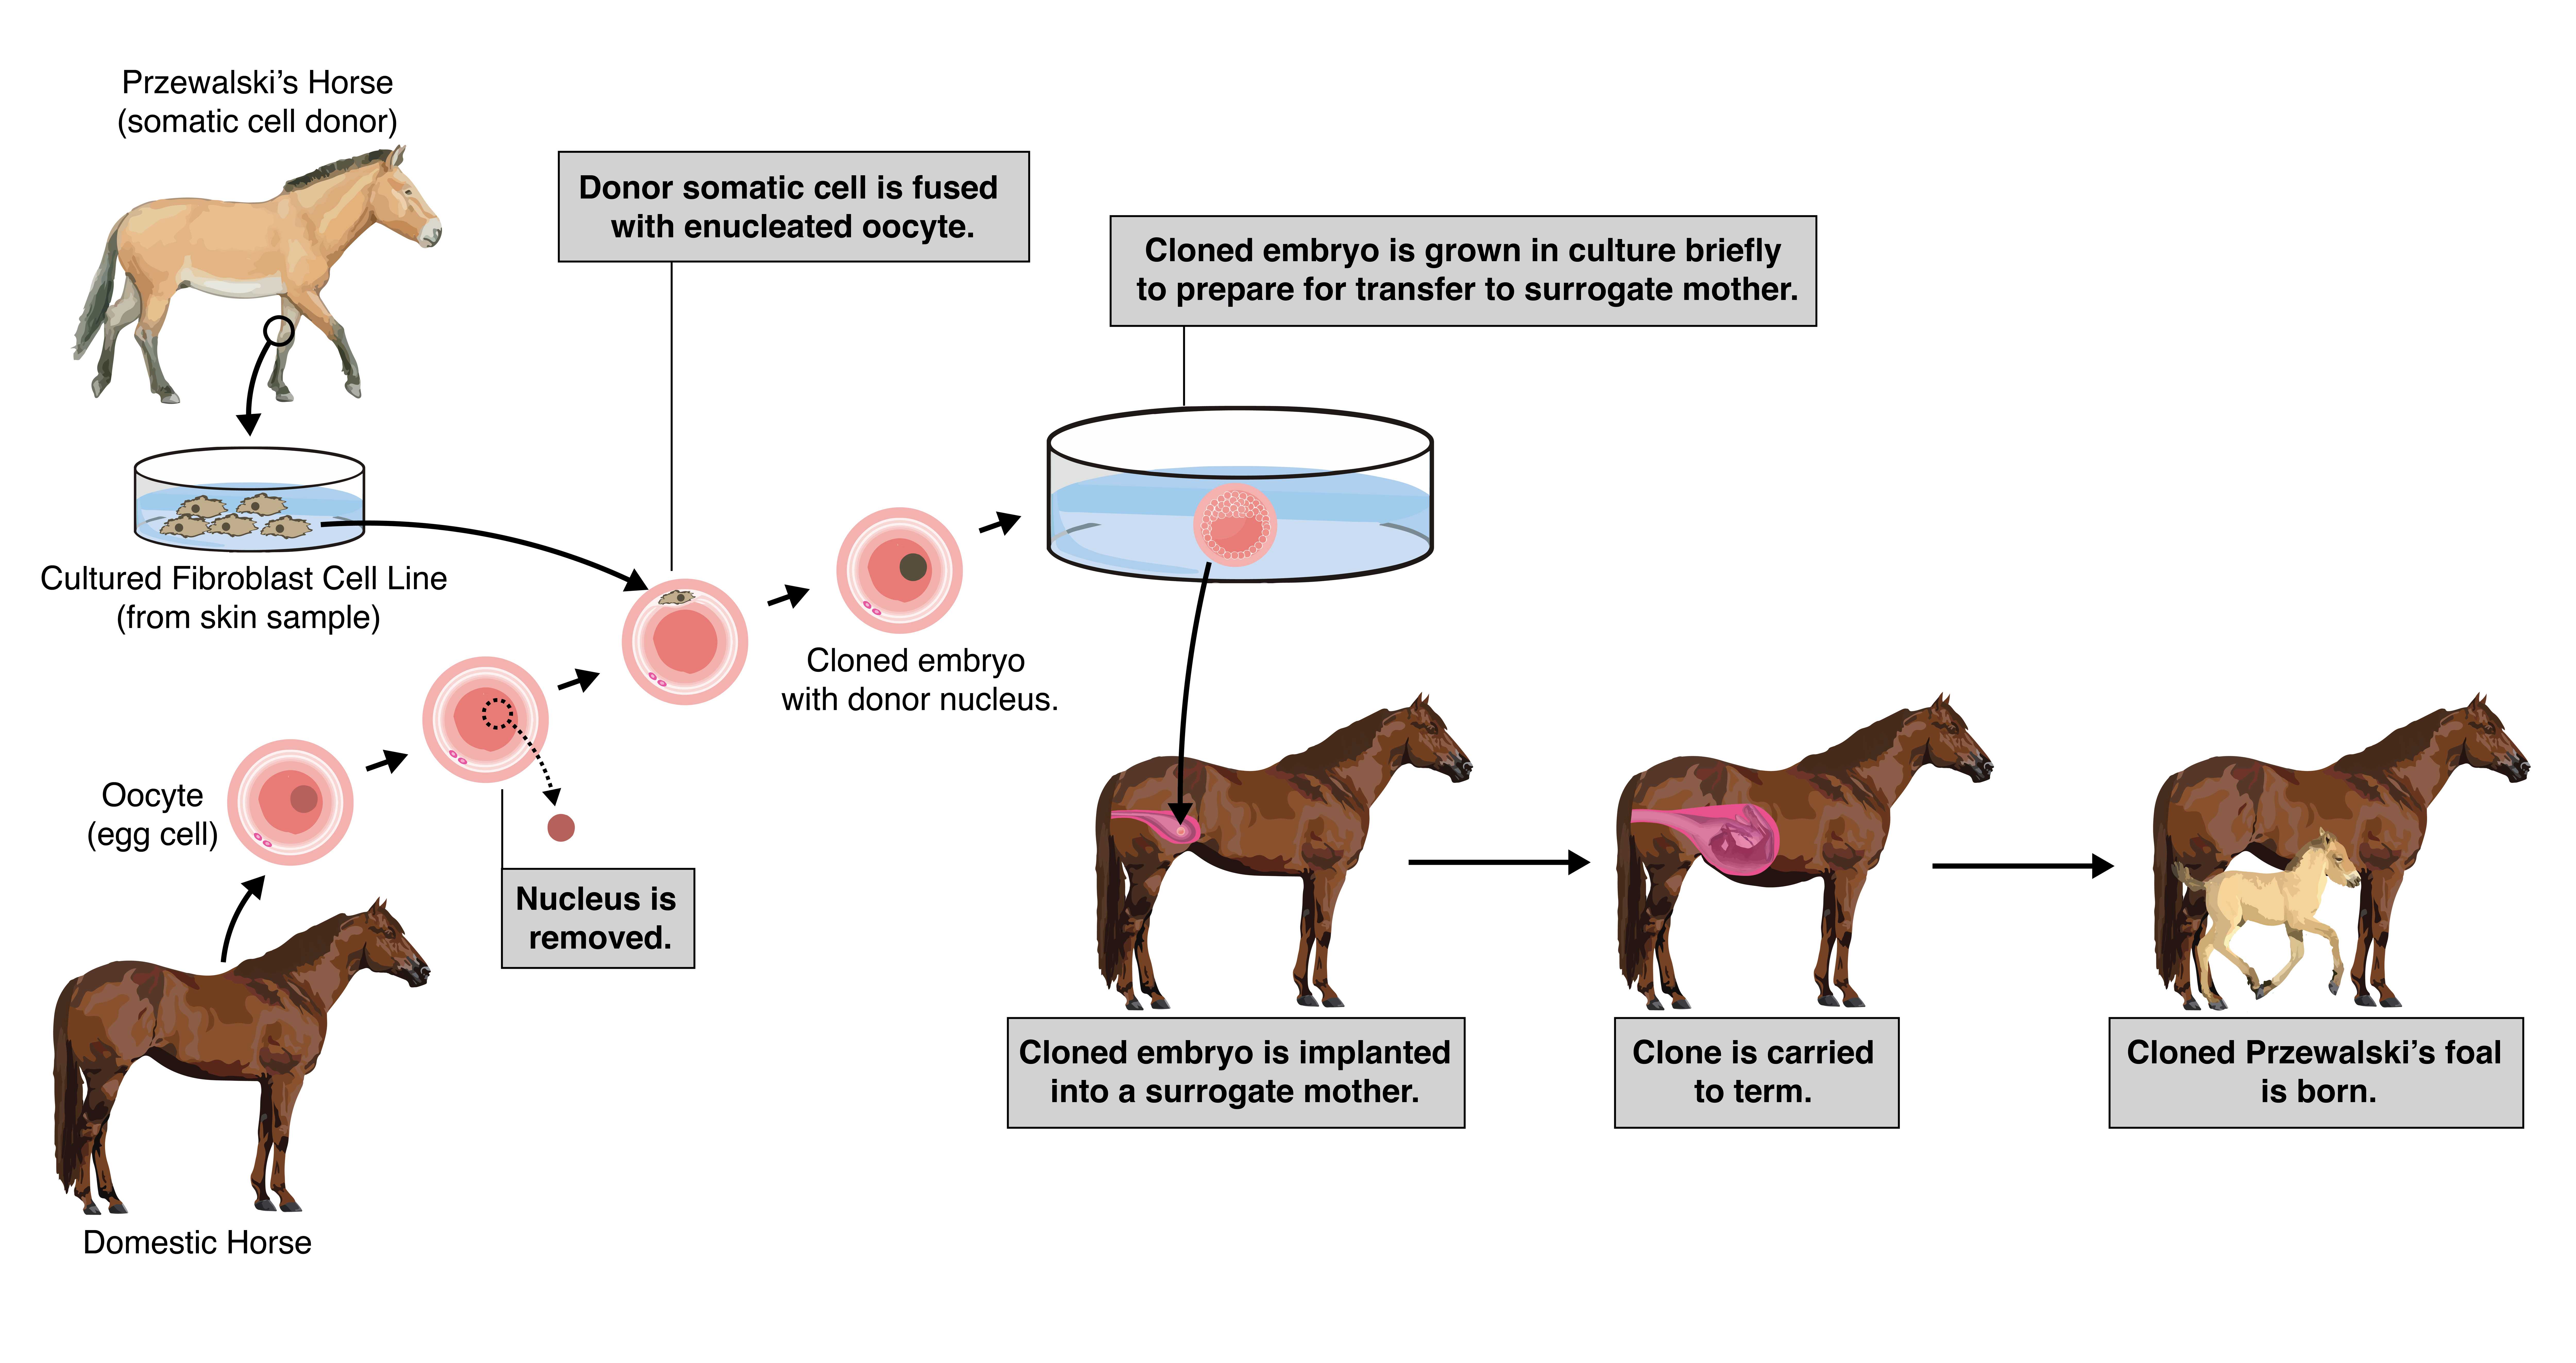 Schematic showing the process used to create the cloned Przewalski's horse